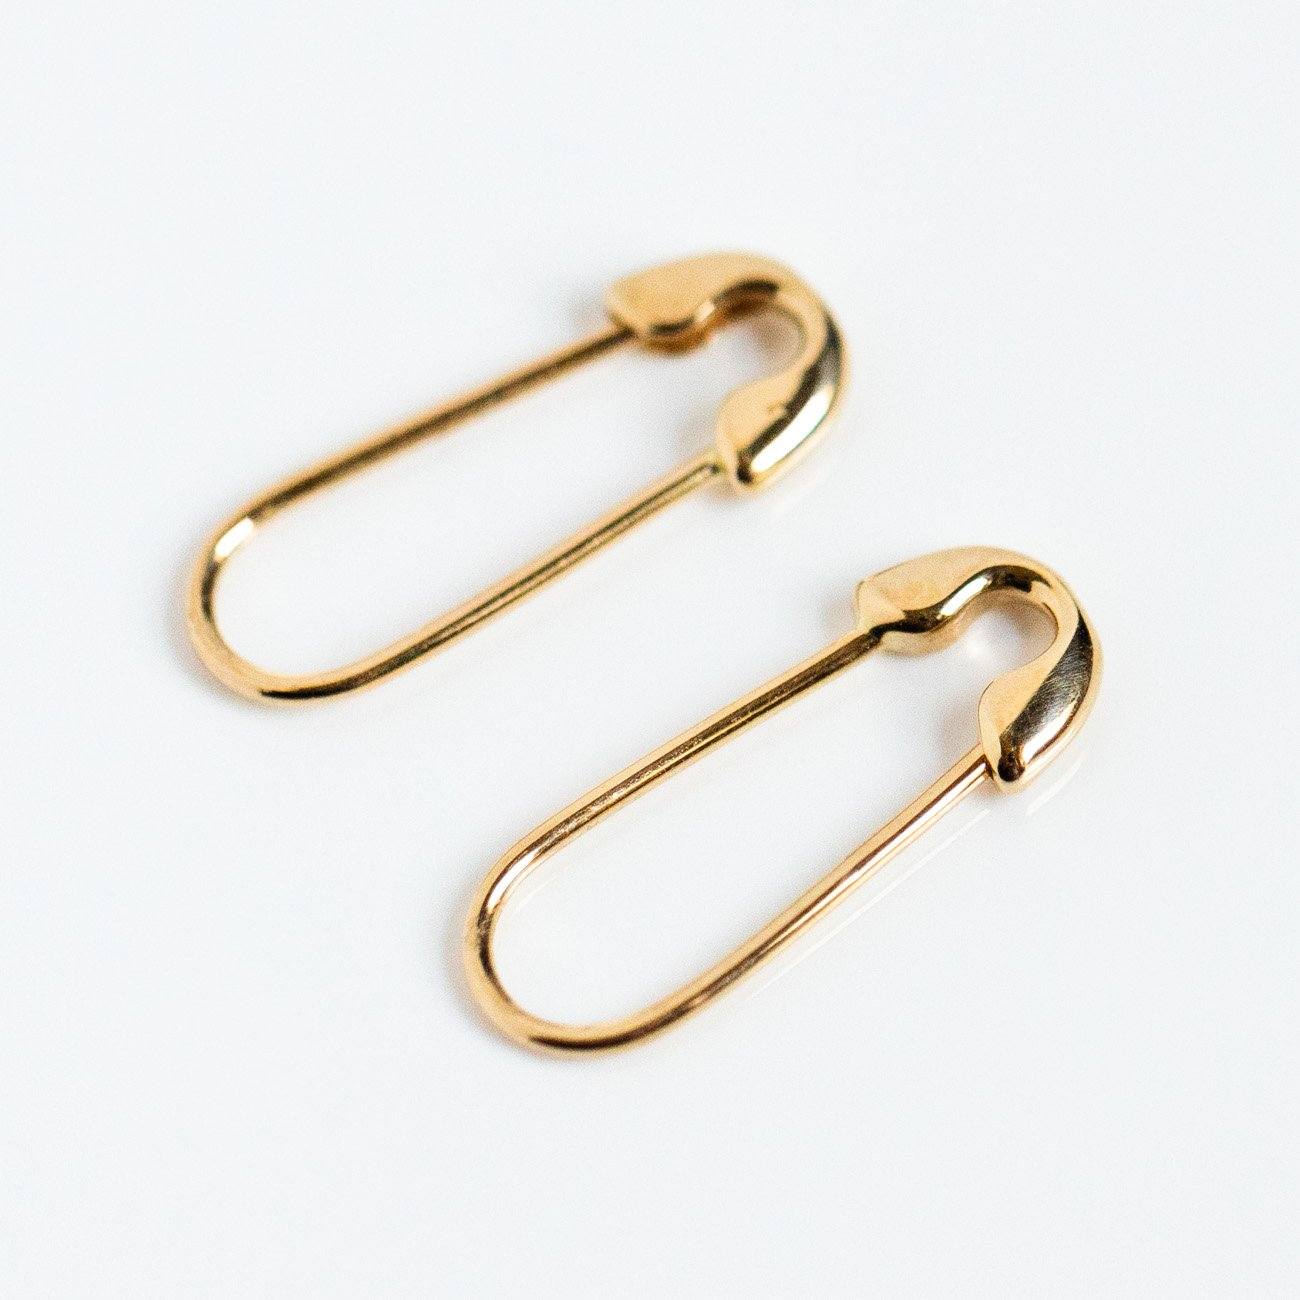 Safety Pin Earrings - Wear Or Trash • Exquisite Magazine • Fashion